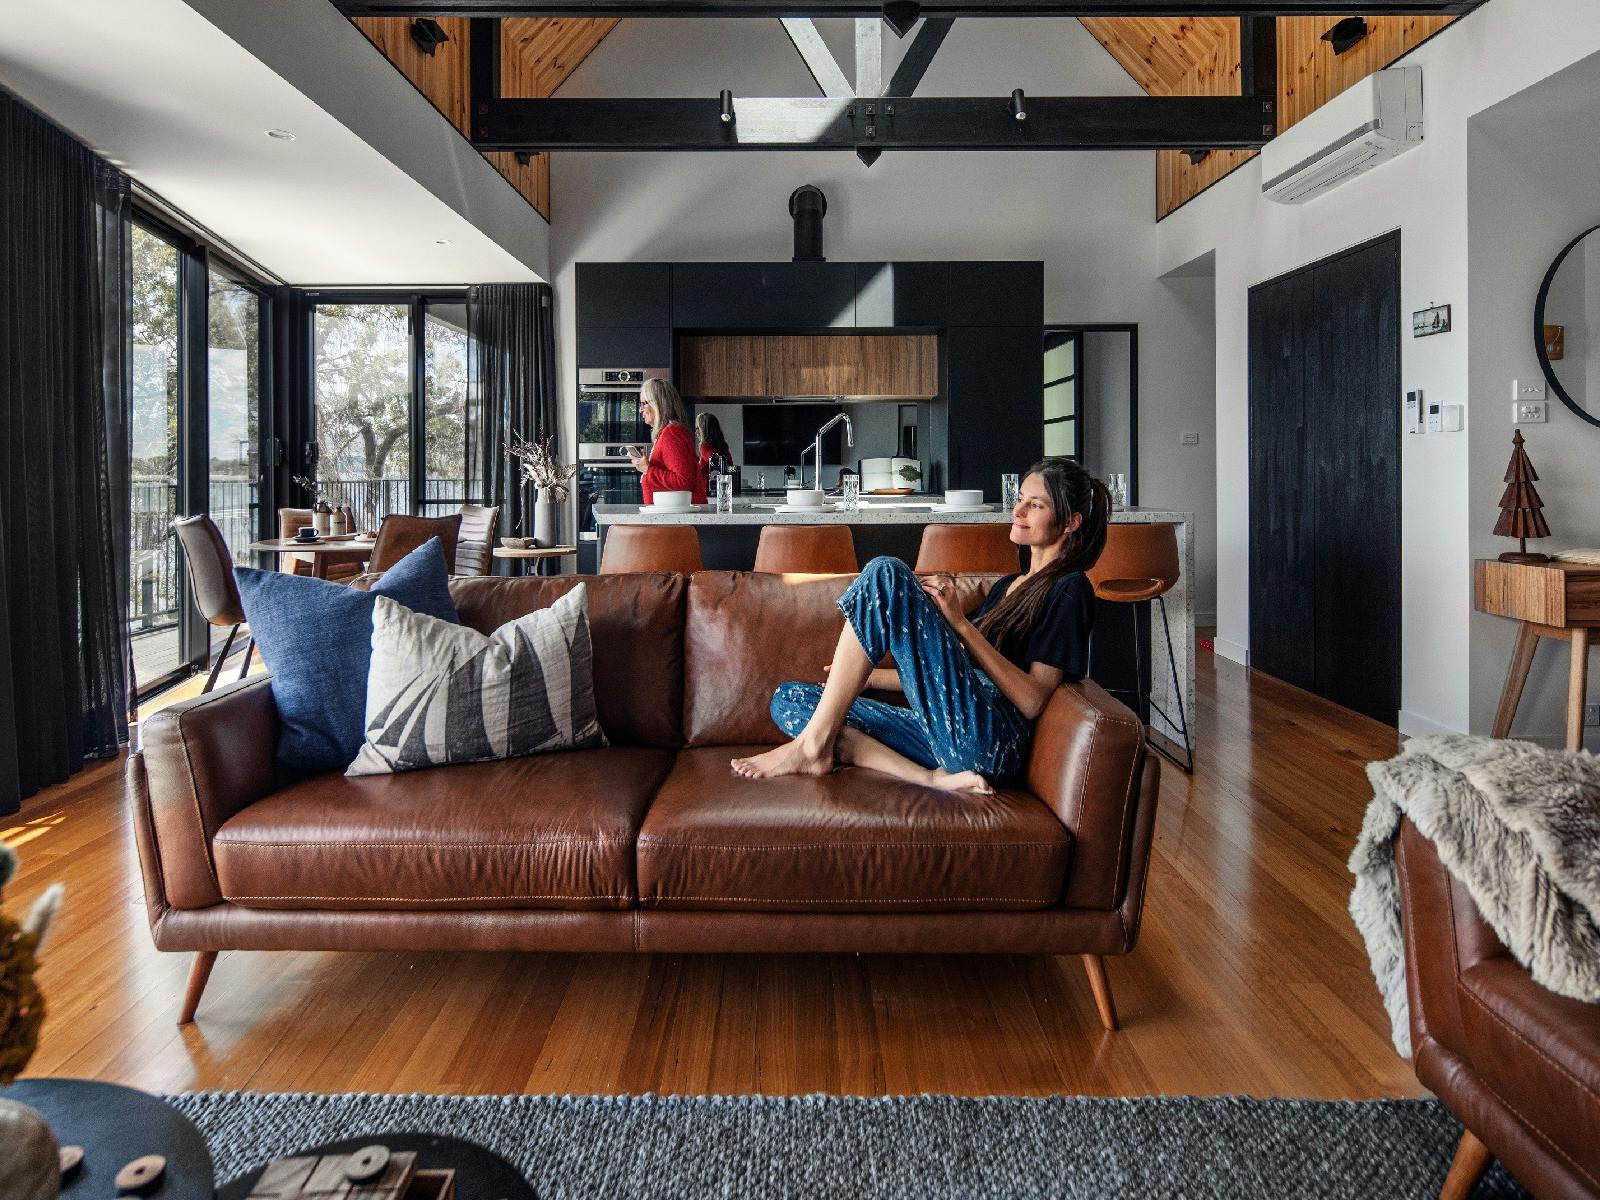 The open plan living area is perfect for relaxing or interacting with friends and families